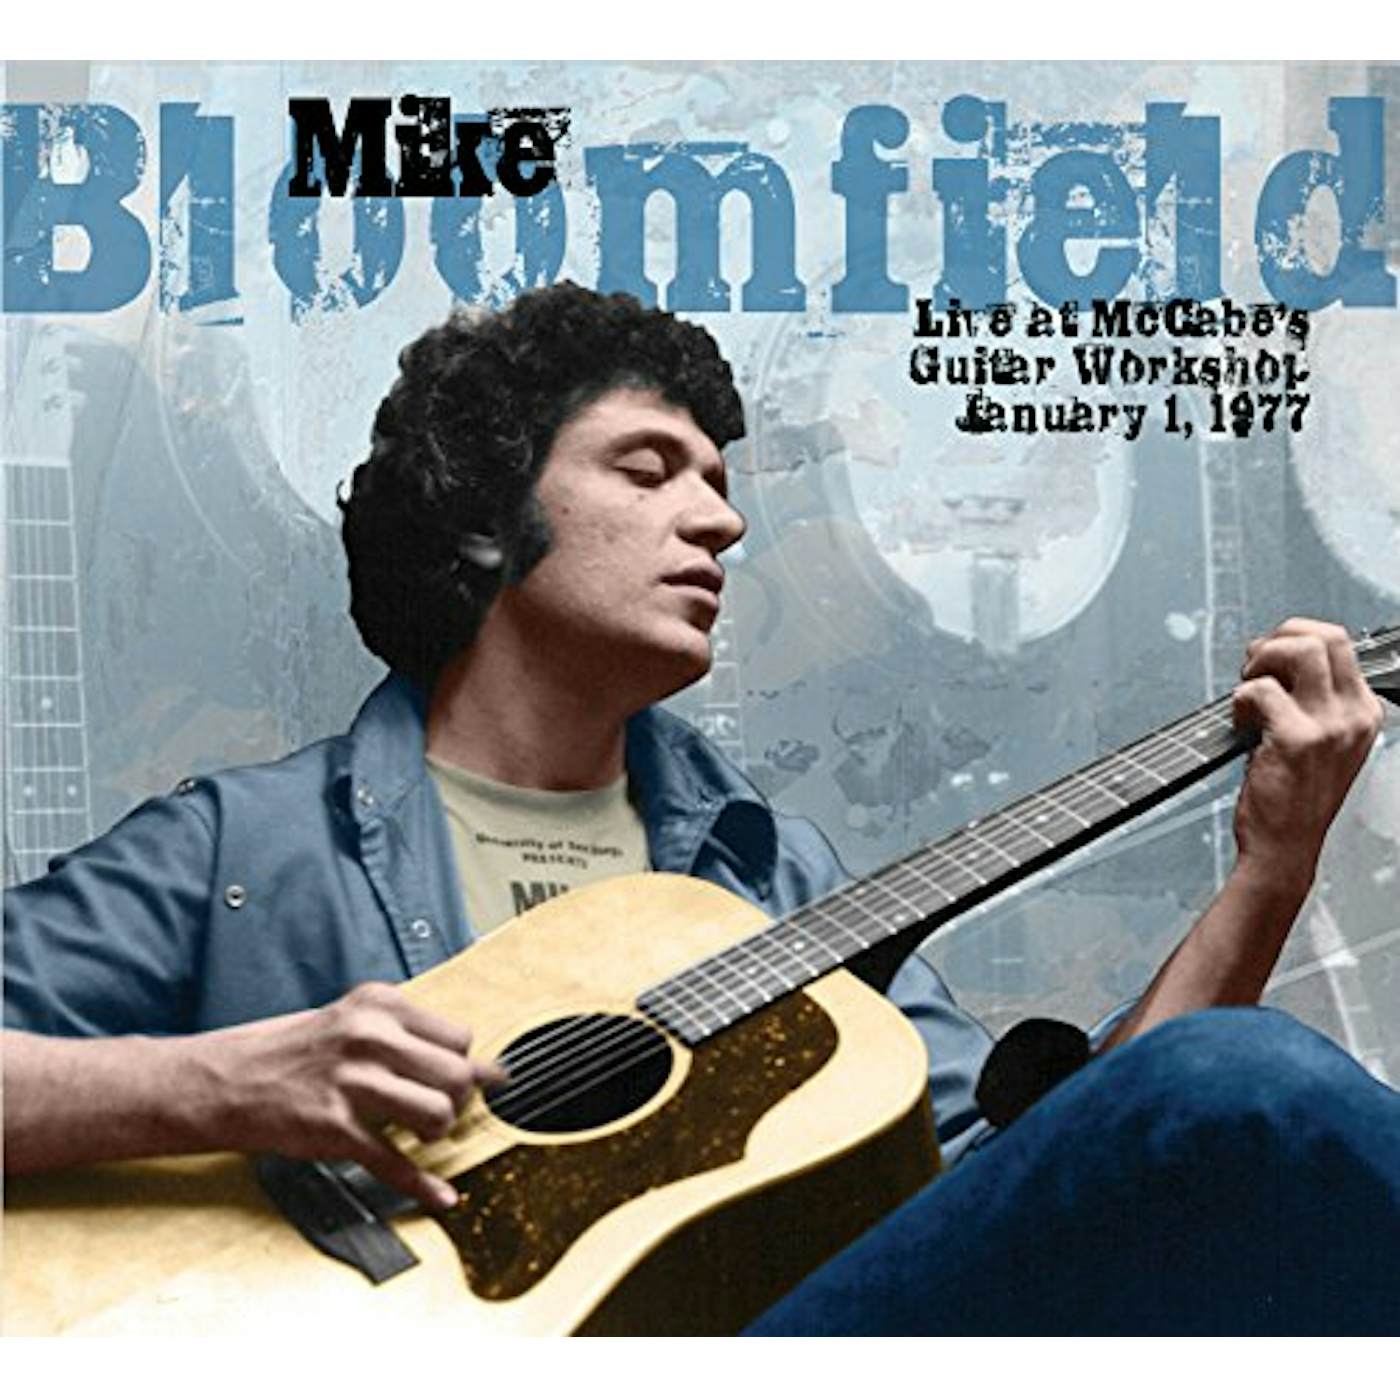 Mike Bloomfield LIVE AT MCCABE'S GUITAR WORKSHOP JANUARY 1 1977 Vinyl Record